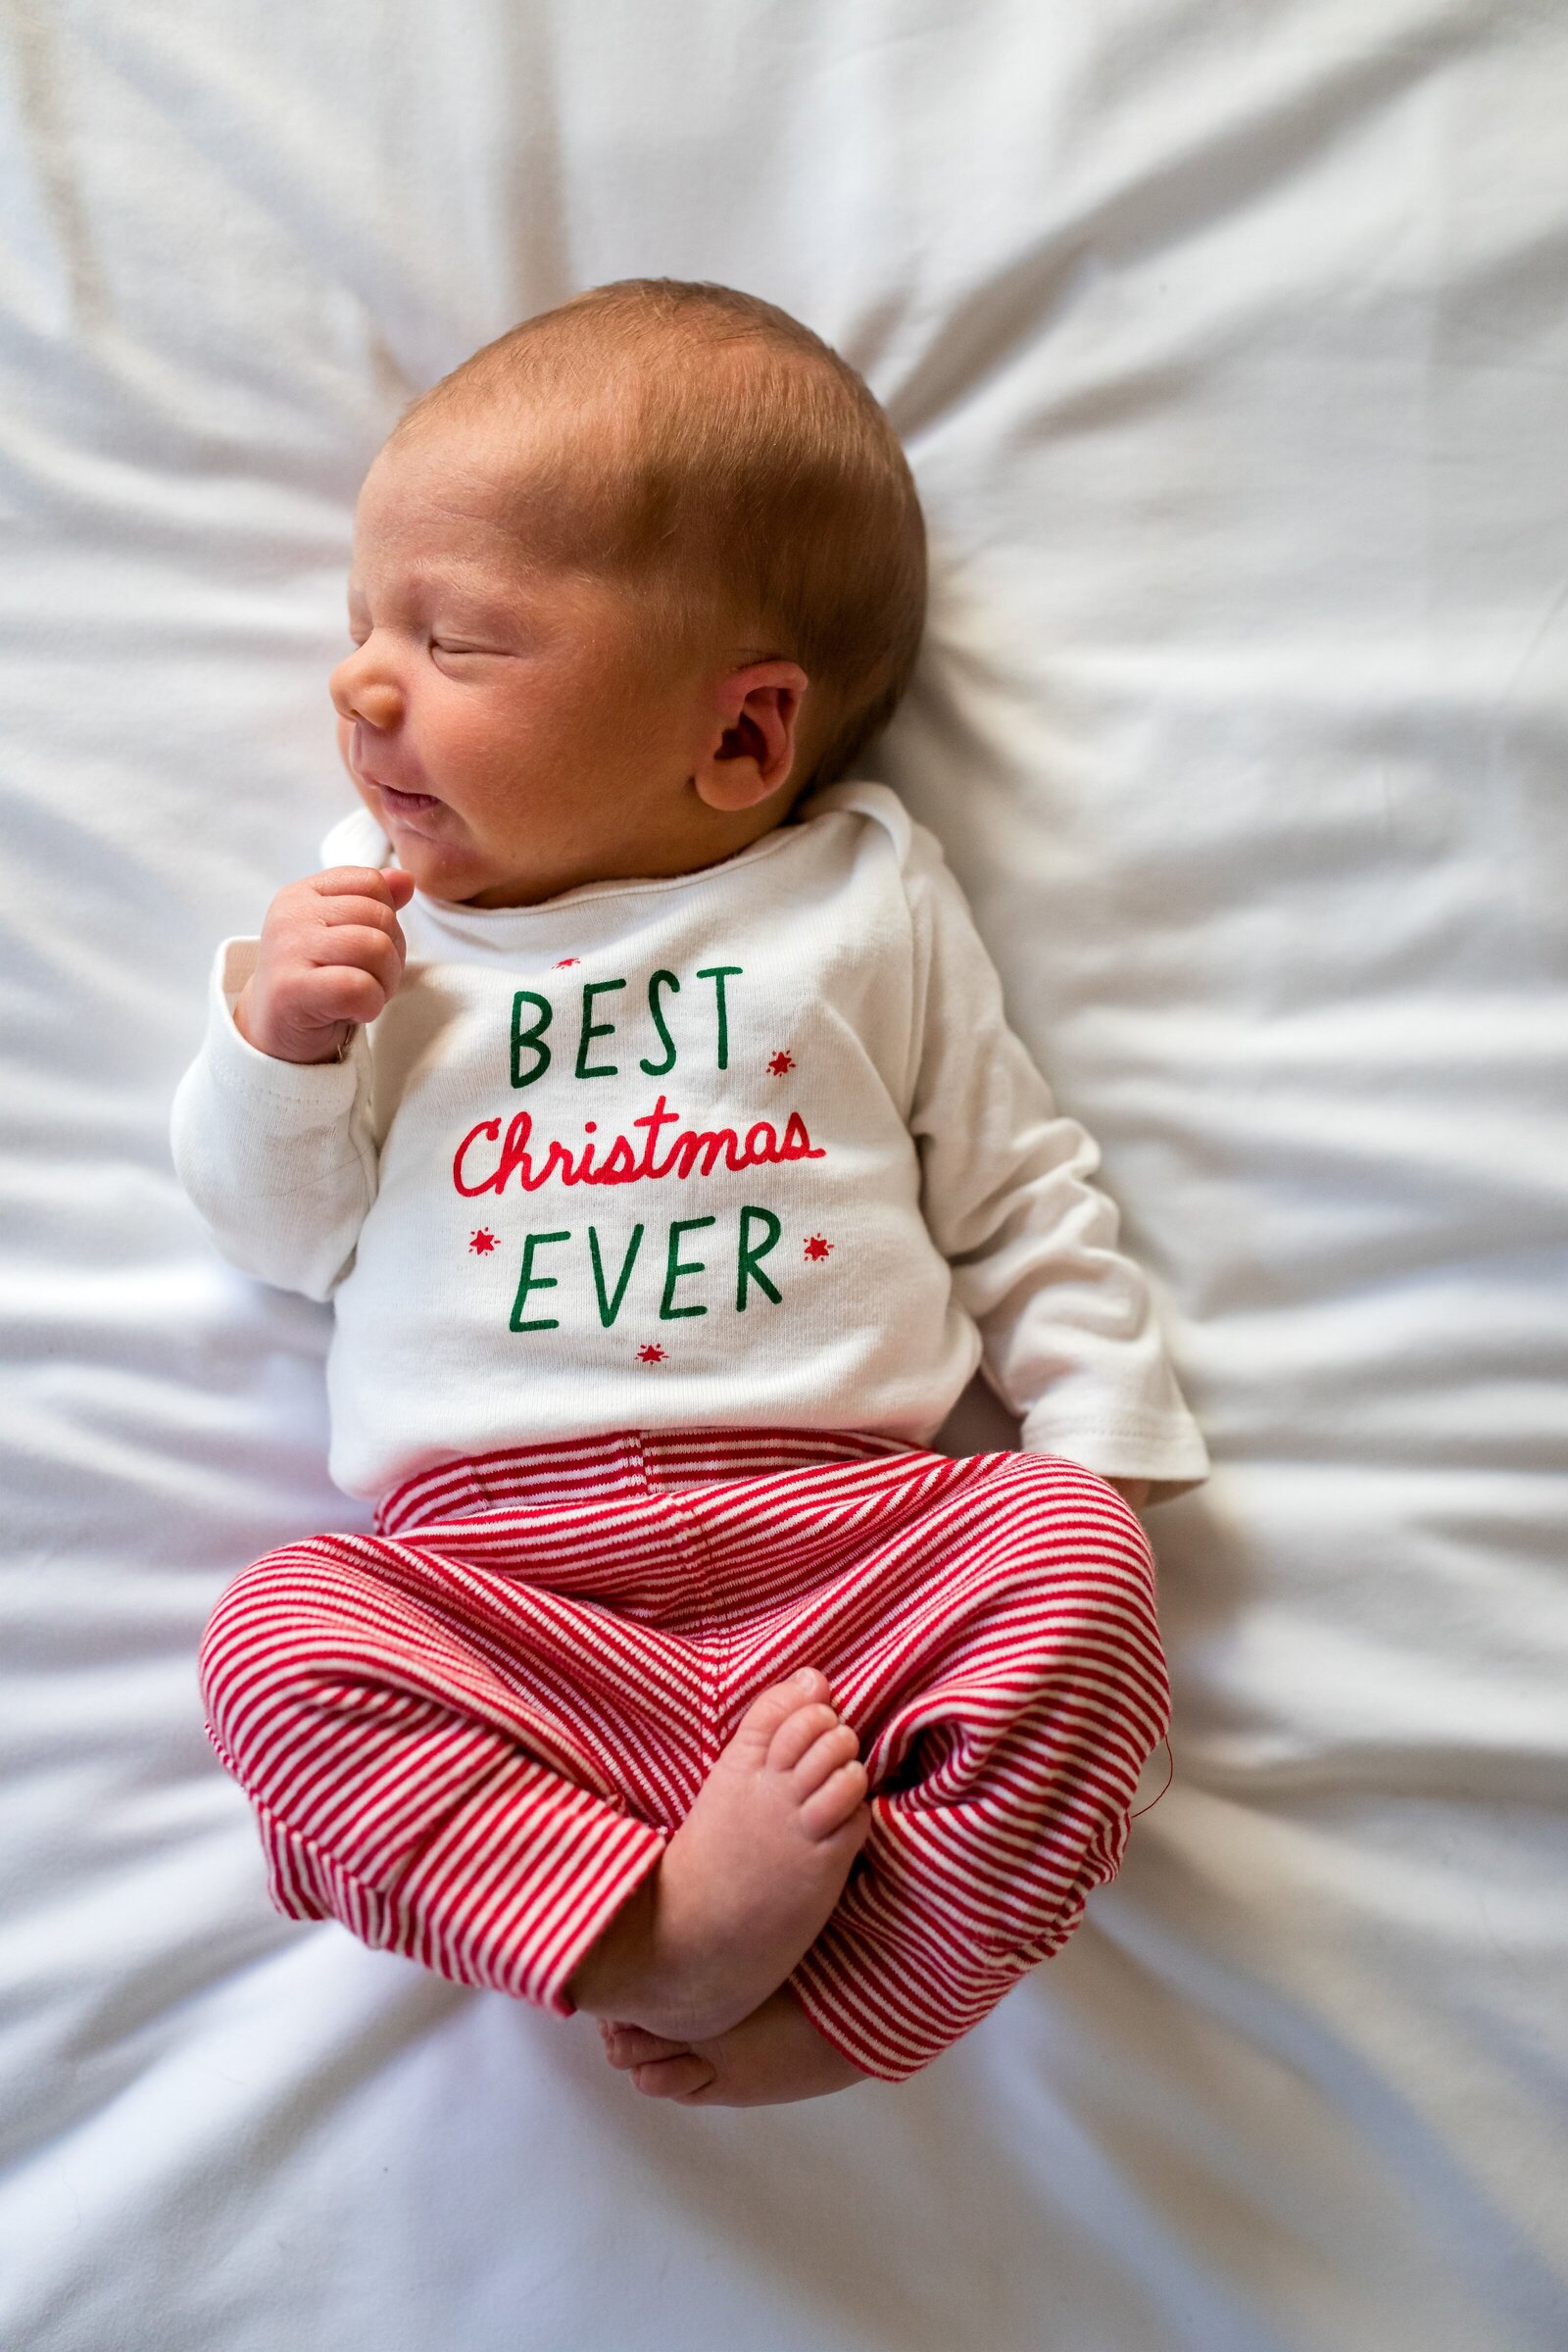 One week old baby in  Best Christmas Ever outfit